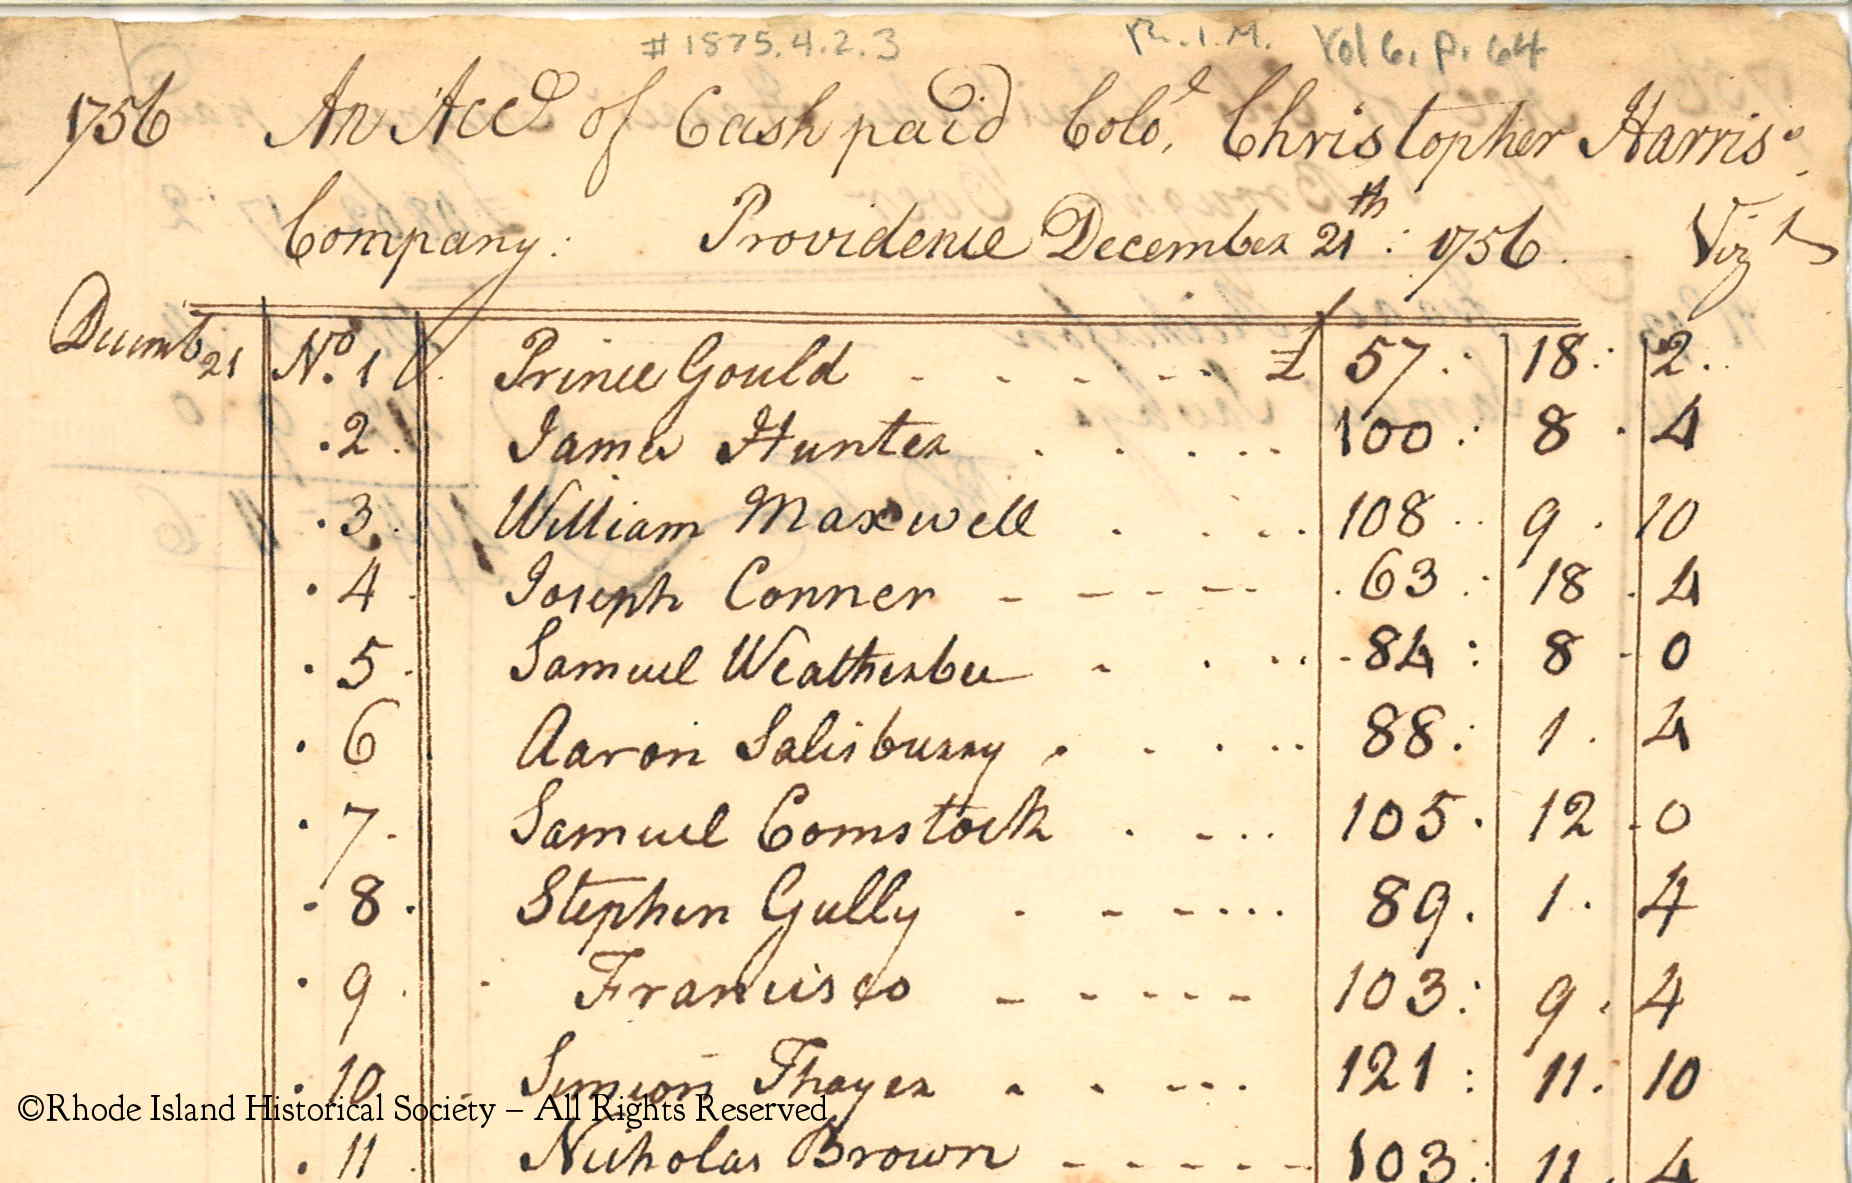 Pay Roll for Col. Christopher  Harris Co.,  21 Dec 1756